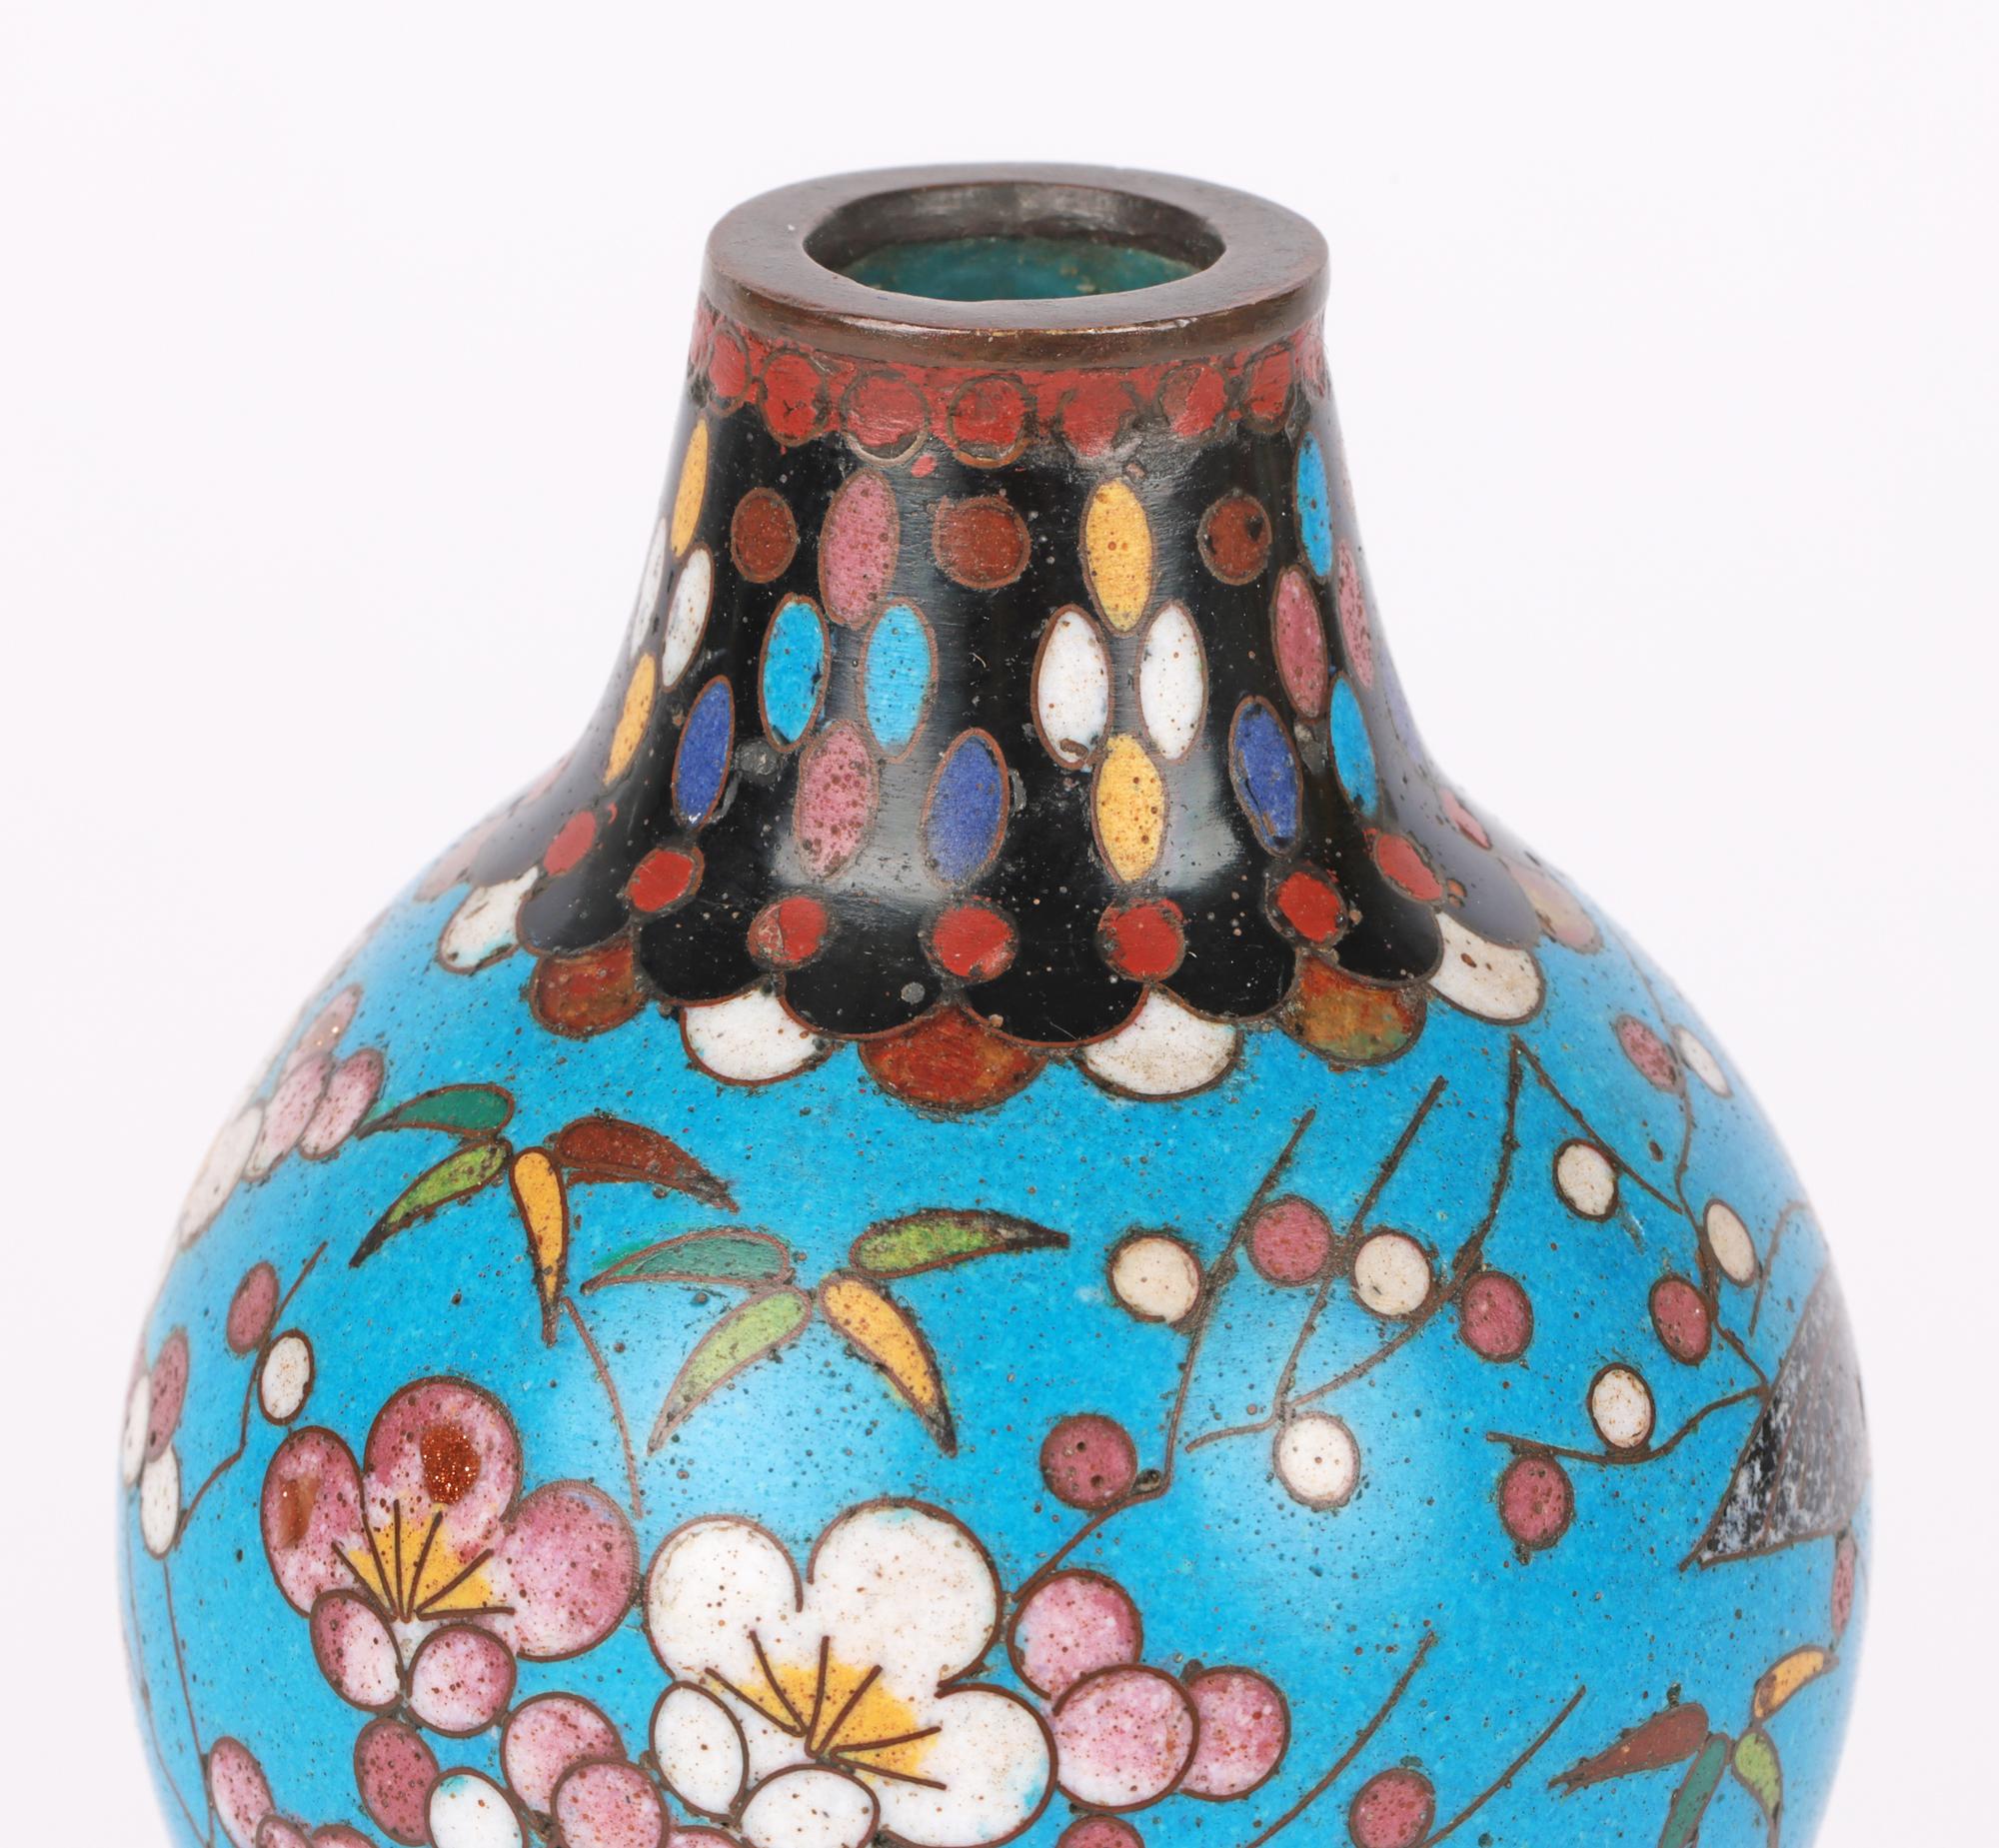 A very fine and stylish antique oriental, Chinese attributed, cloisonne double gourd vase dating from the latter 19th century. The vase stands on a flat brass base with a wide round base, pinched waist and narrow round upper section with a funnel